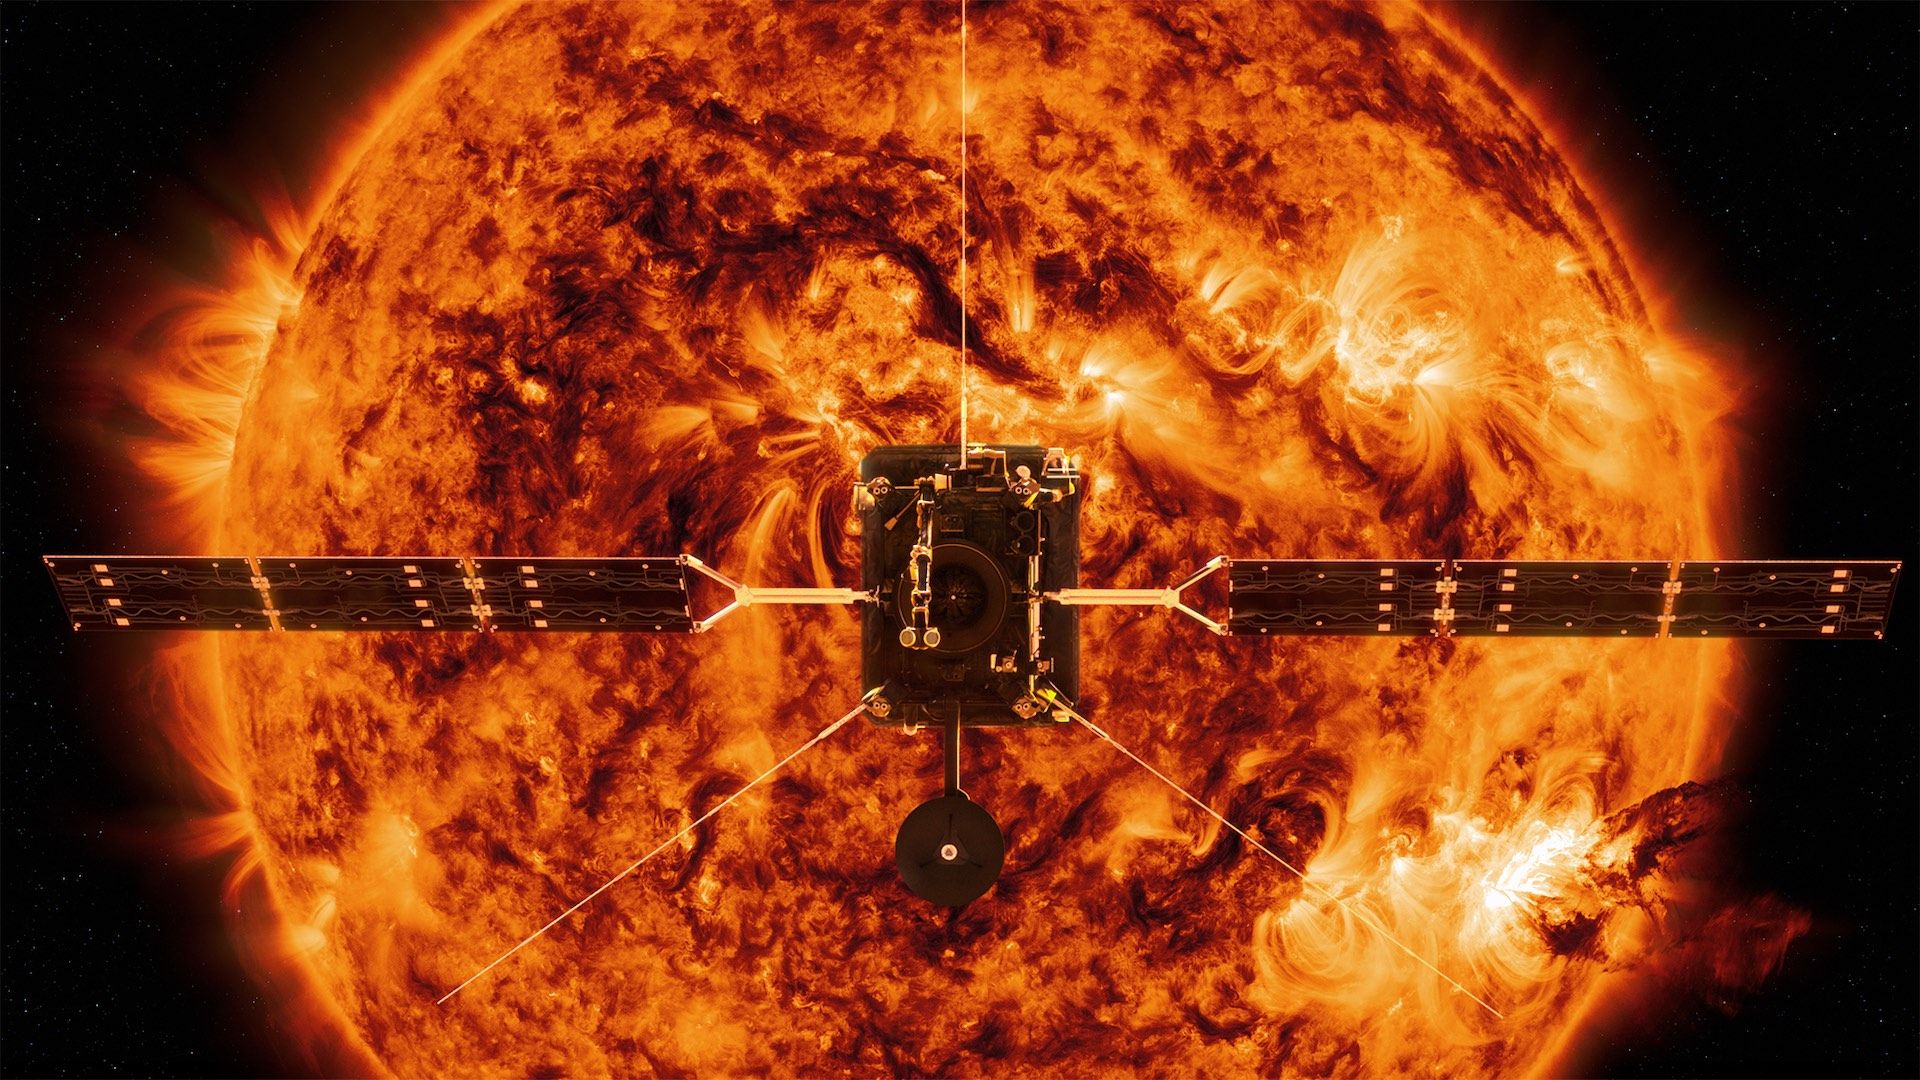 Artist's illustration showing the Solar Orbiter in front of the Sun shining in orange and yellow